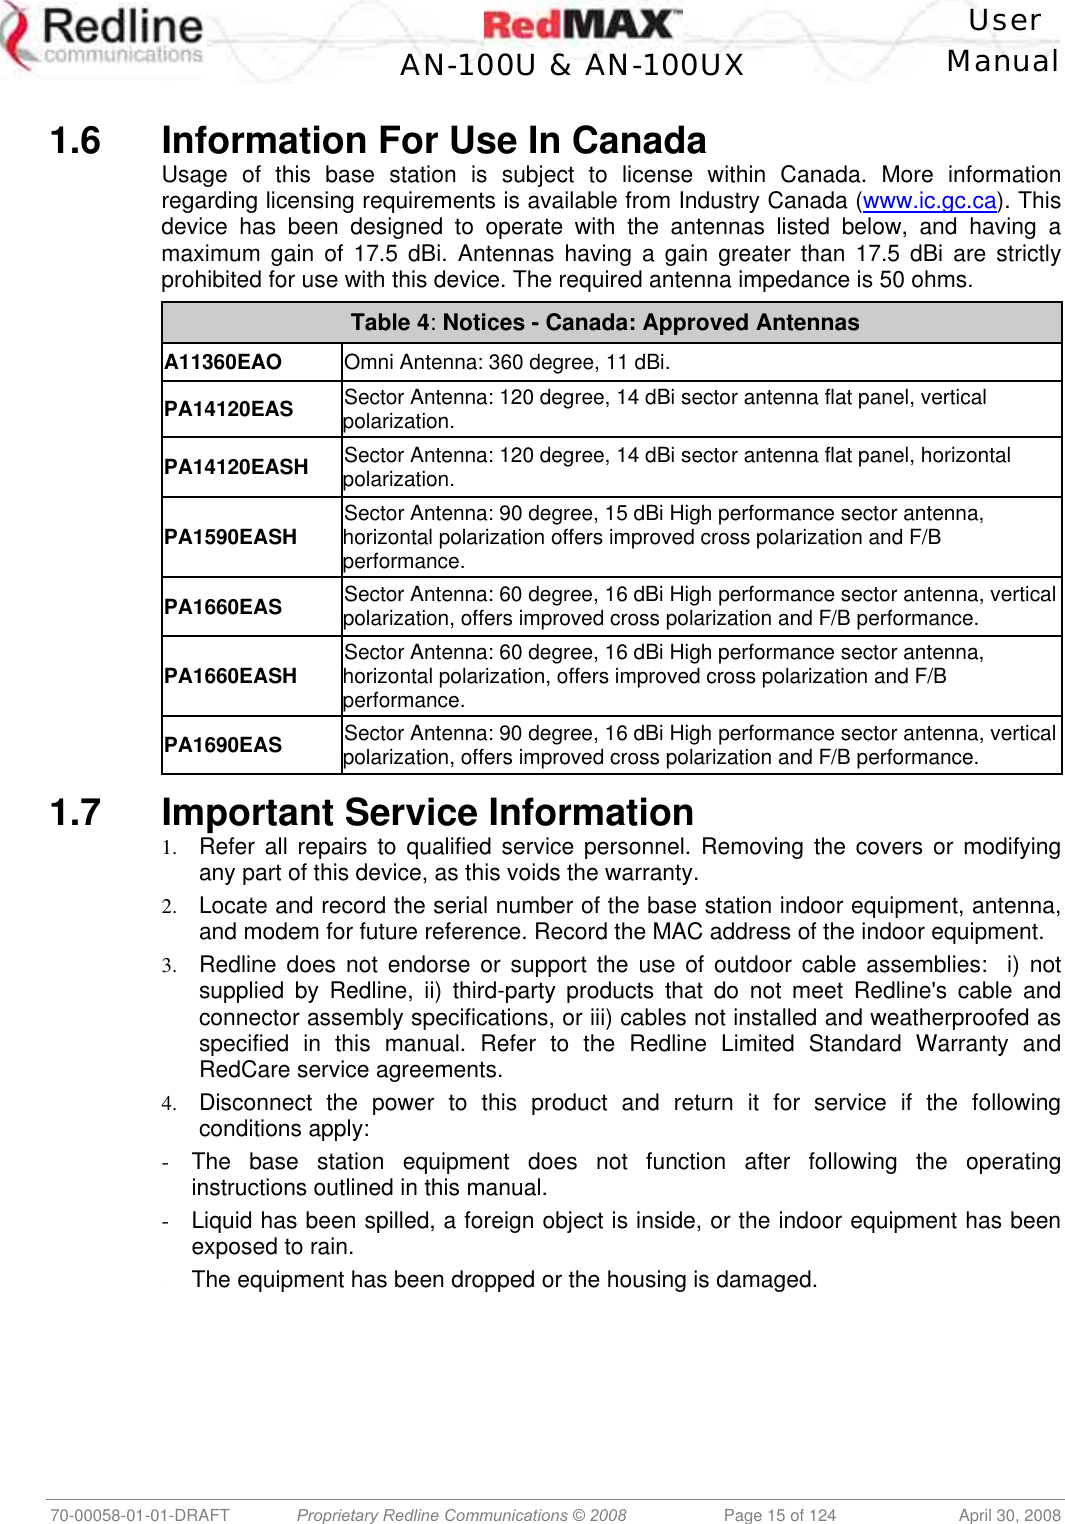    User  AN-100U &amp; AN-100UX Manual   70-00058-01-01-DRAFT  Proprietary Redline Communications © 2008   Page 15 of 124  April 30, 2008  1.6  Information For Use In Canada Usage of this base station is subject to license within Canada. More information regarding licensing requirements is available from Industry Canada (www.ic.gc.ca). This device has been designed to operate with the antennas listed below, and having a maximum gain of 17.5 dBi. Antennas having a gain greater than 17.5 dBi are strictly prohibited for use with this device. The required antenna impedance is 50 ohms. Table 4: Notices - Canada: Approved Antennas A11360EAO Omni Antenna: 360 degree, 11 dBi. PA14120EAS Sector Antenna: 120 degree, 14 dBi sector antenna flat panel, vertical polarization. PA14120EASH Sector Antenna: 120 degree, 14 dBi sector antenna flat panel, horizontal polarization. PA1590EASH Sector Antenna: 90 degree, 15 dBi High performance sector antenna, horizontal polarization offers improved cross polarization and F/B performance. PA1660EAS Sector Antenna: 60 degree, 16 dBi High performance sector antenna, vertical polarization, offers improved cross polarization and F/B performance. PA1660EASH Sector Antenna: 60 degree, 16 dBi High performance sector antenna, horizontal polarization, offers improved cross polarization and F/B performance. PA1690EAS Sector Antenna: 90 degree, 16 dBi High performance sector antenna, vertical polarization, offers improved cross polarization and F/B performance.   1.7  Important Service Information 1.  Refer all repairs to qualified service personnel. Removing the covers or modifying any part of this device, as this voids the warranty. 2.  Locate and record the serial number of the base station indoor equipment, antenna, and modem for future reference. Record the MAC address of the indoor equipment. 3.  Redline does not endorse or support the use of outdoor cable assemblies:  i) not supplied by Redline, ii) third-party products that do not meet Redline&apos;s cable and connector assembly specifications, or iii) cables not installed and weatherproofed as specified in this manual. Refer to the Redline Limited Standard Warranty and RedCare service agreements. 4.  Disconnect the power to this product and return it for service if the following conditions apply: -  The base station equipment does not function after following the operating instructions outlined in this manual. -  Liquid has been spilled, a foreign object is inside, or the indoor equipment has been exposed to rain. -  The equipment has been dropped or the housing is damaged. 